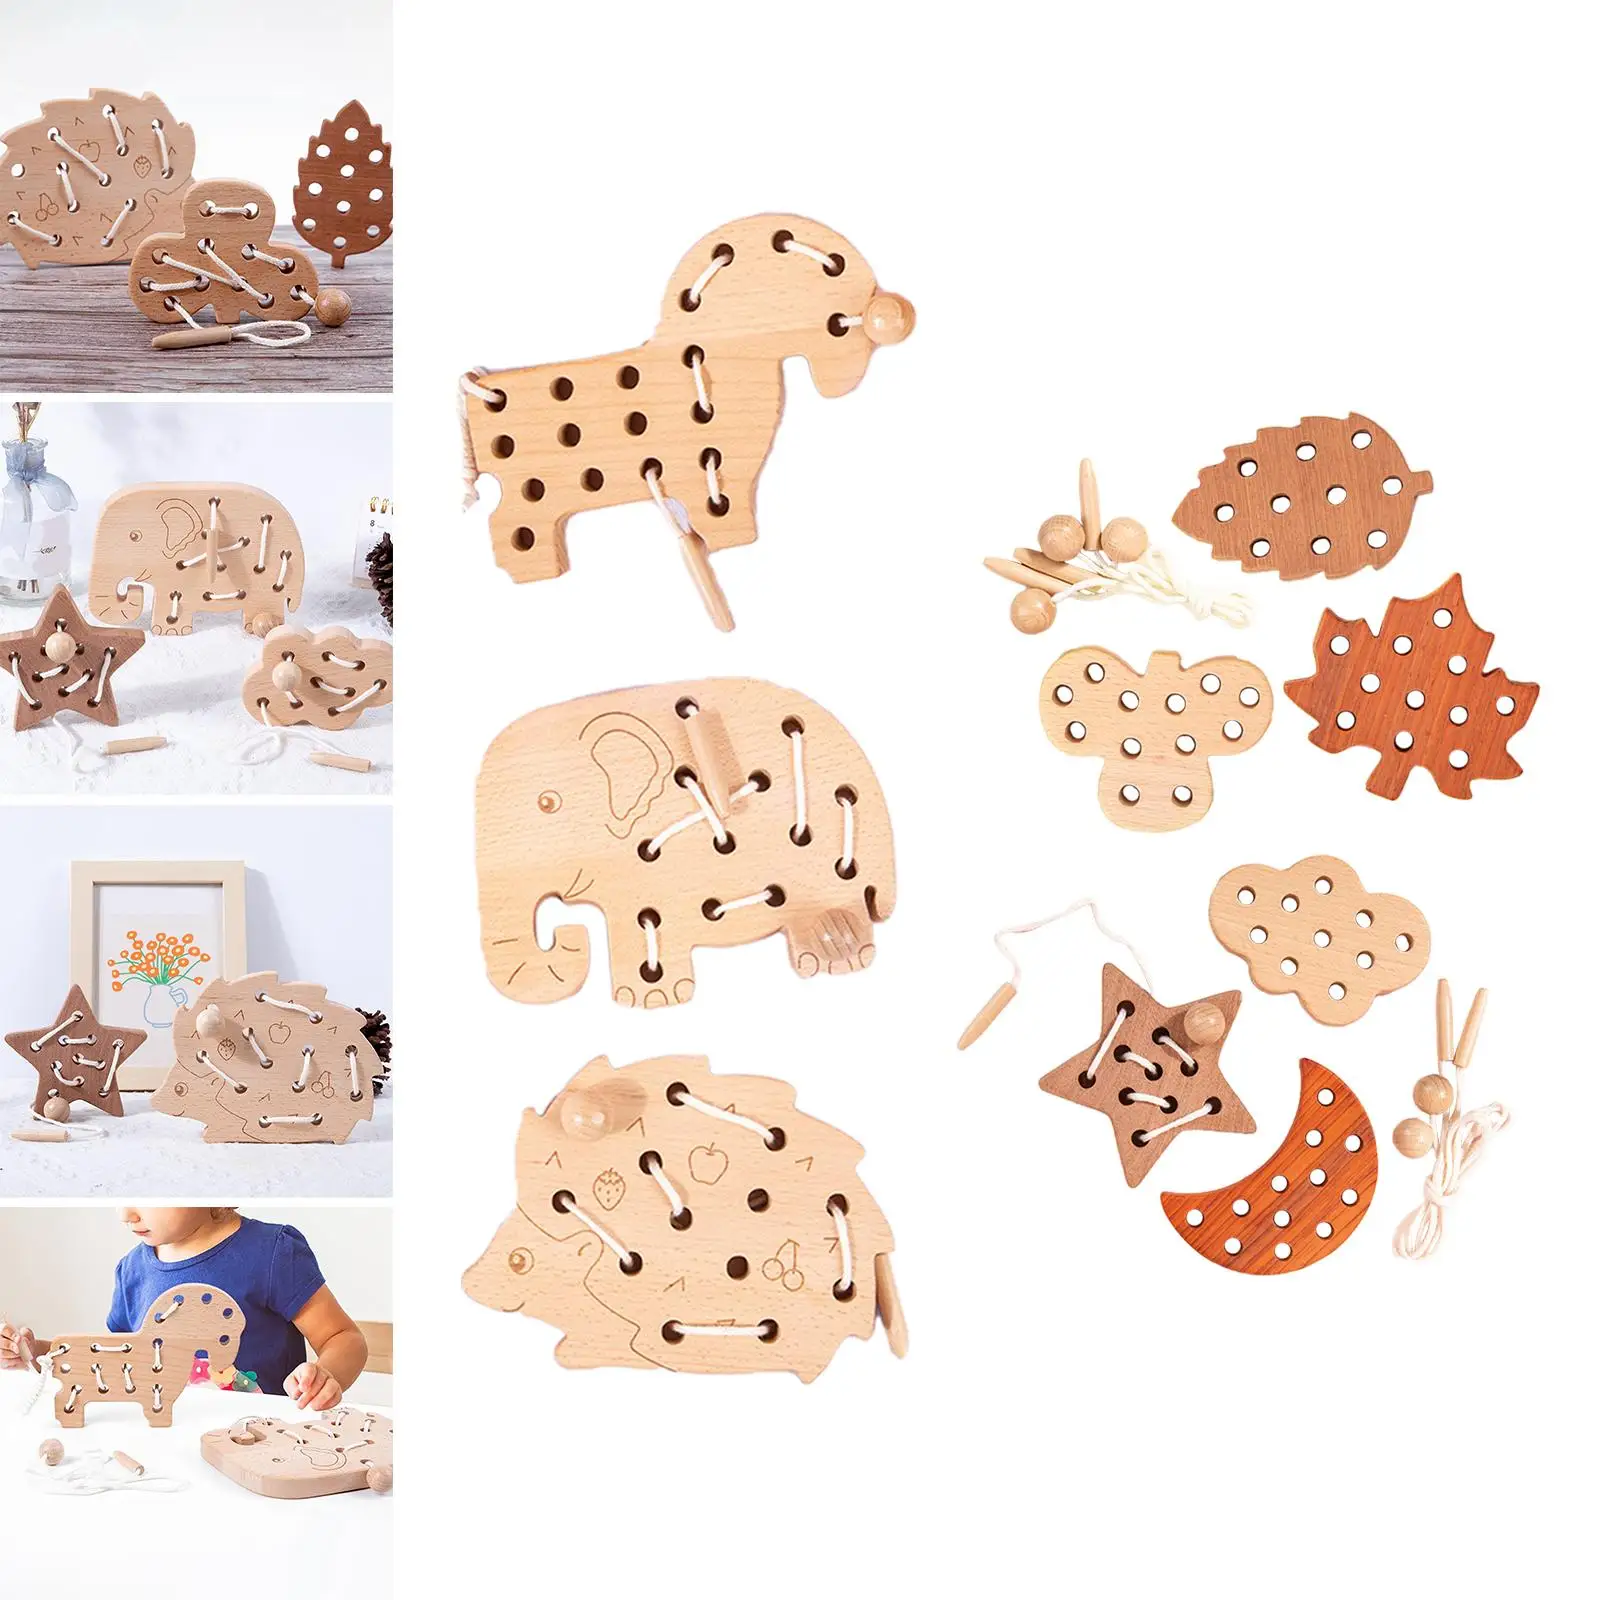 3Pcs Wood Lace Block Puzzle Fine Motor Skills Educational Wooden Lacing Threading for Airplane Toddlers Baby Birthday Gift